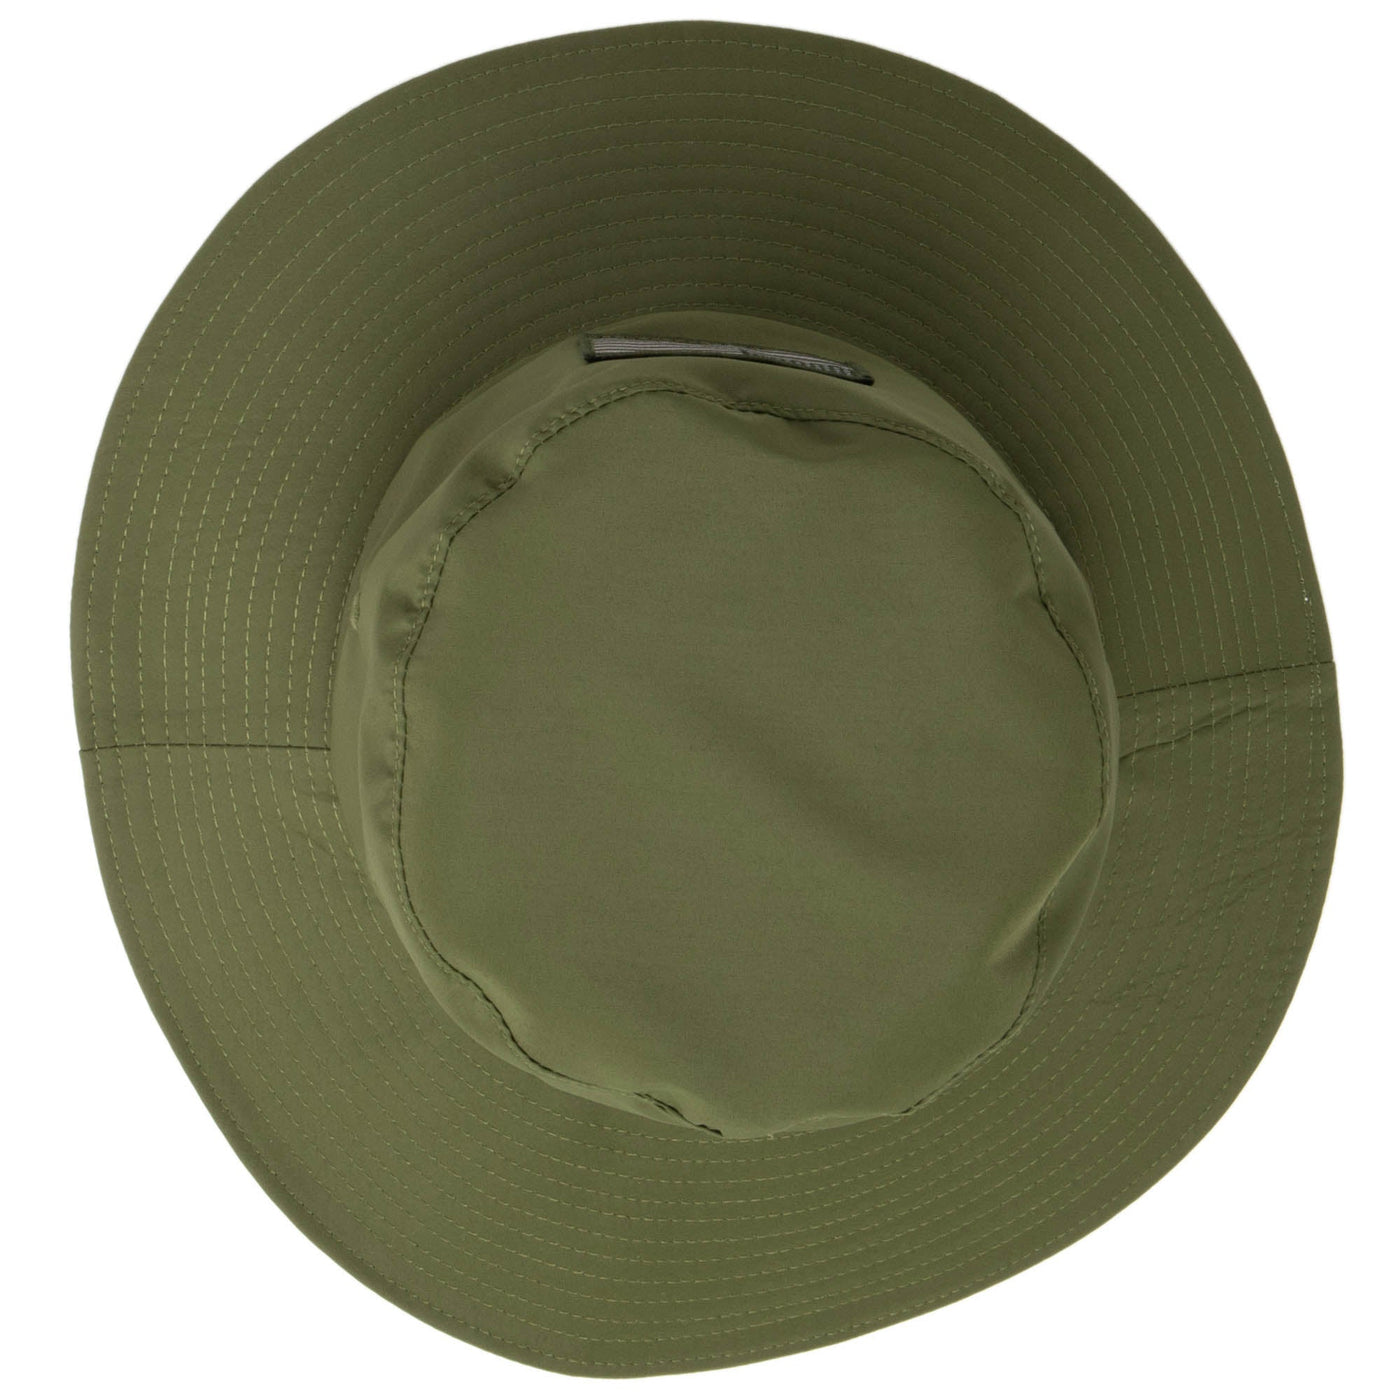 BUCKET - Outdoor Performance Bucket With Chin Cord & American Flag Patch